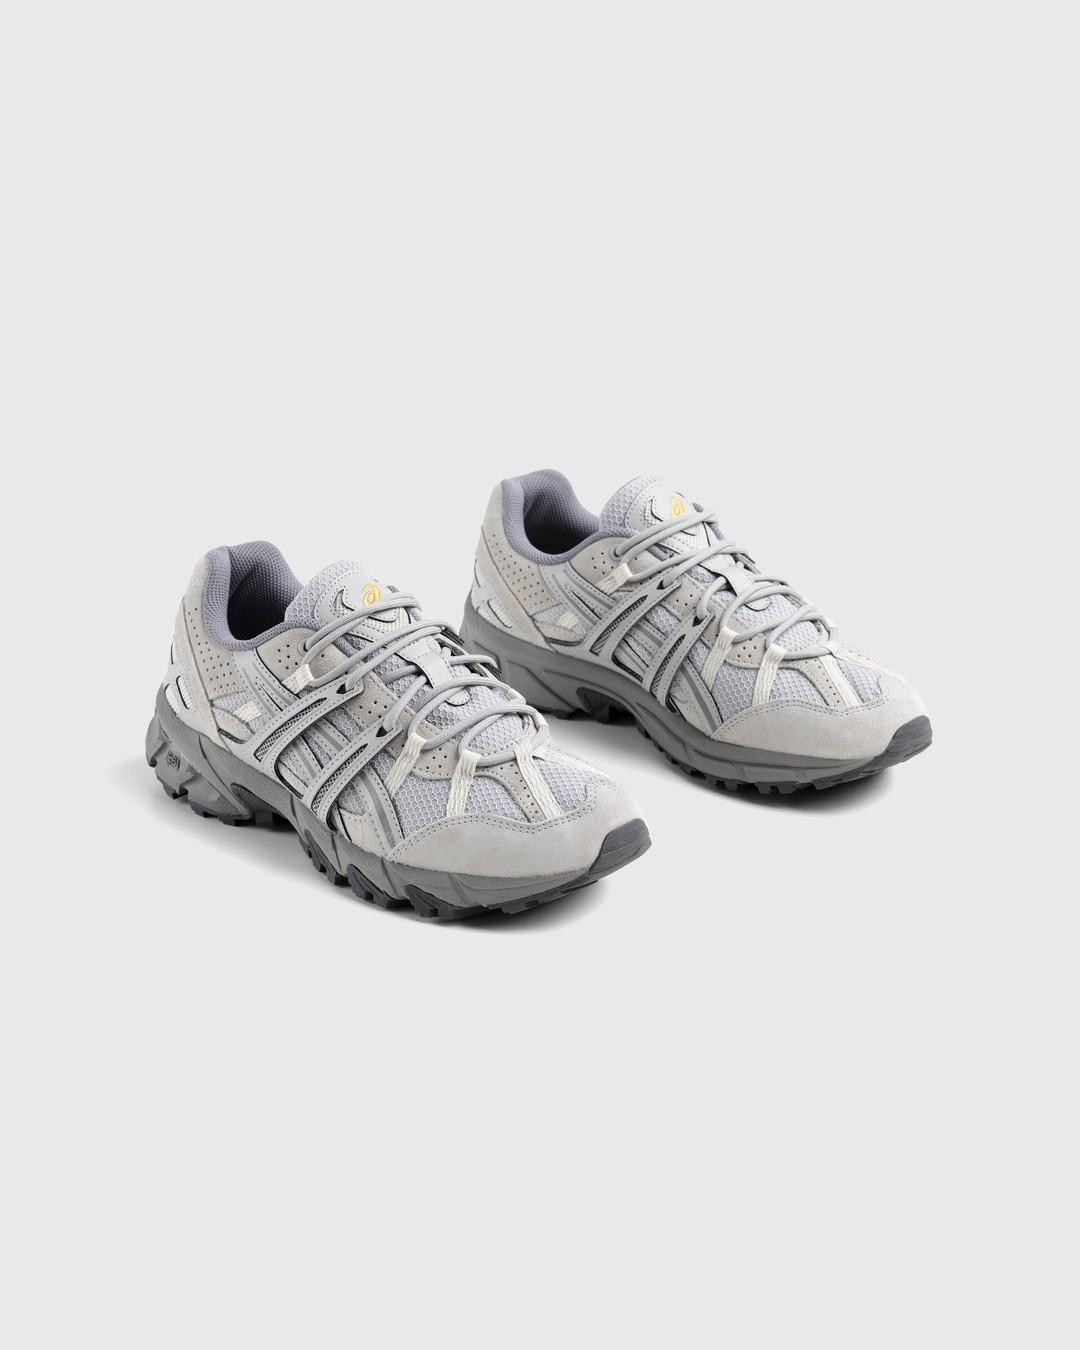 asics – Gel-Sonoma 15-50 Oyster Grey/Clay Grey - Low Top Sneakers - Grey - Image 4